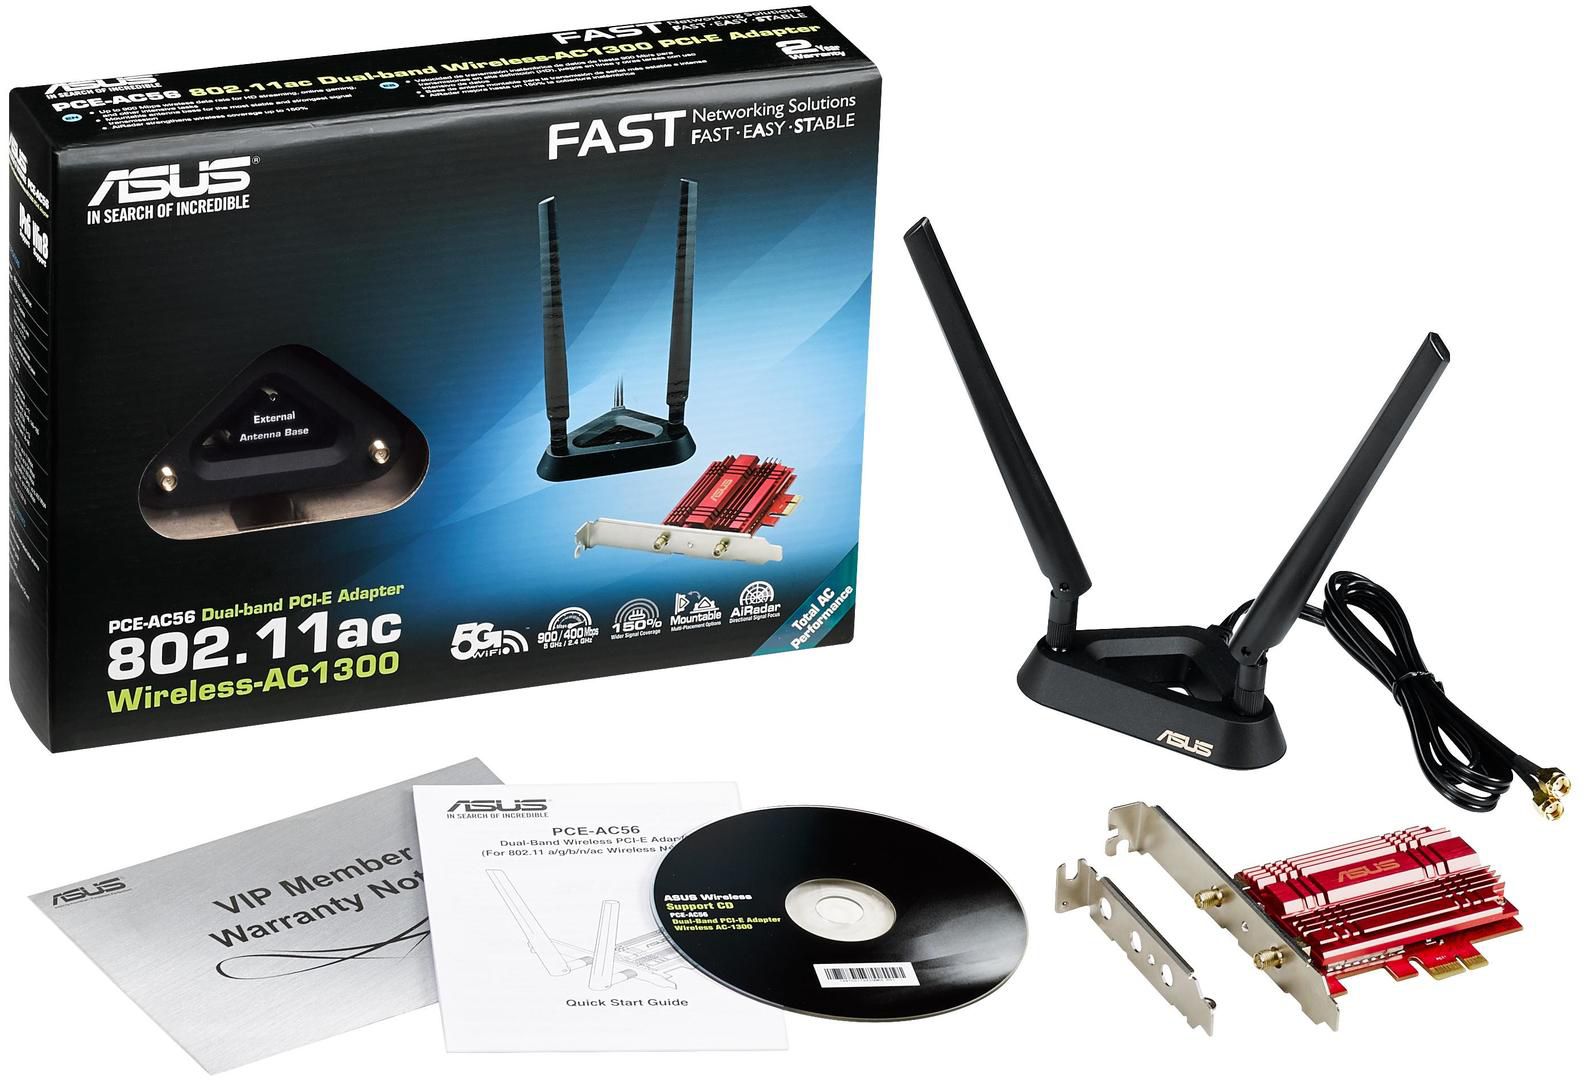 setting to strengthen broadcom 802.11n network adapter